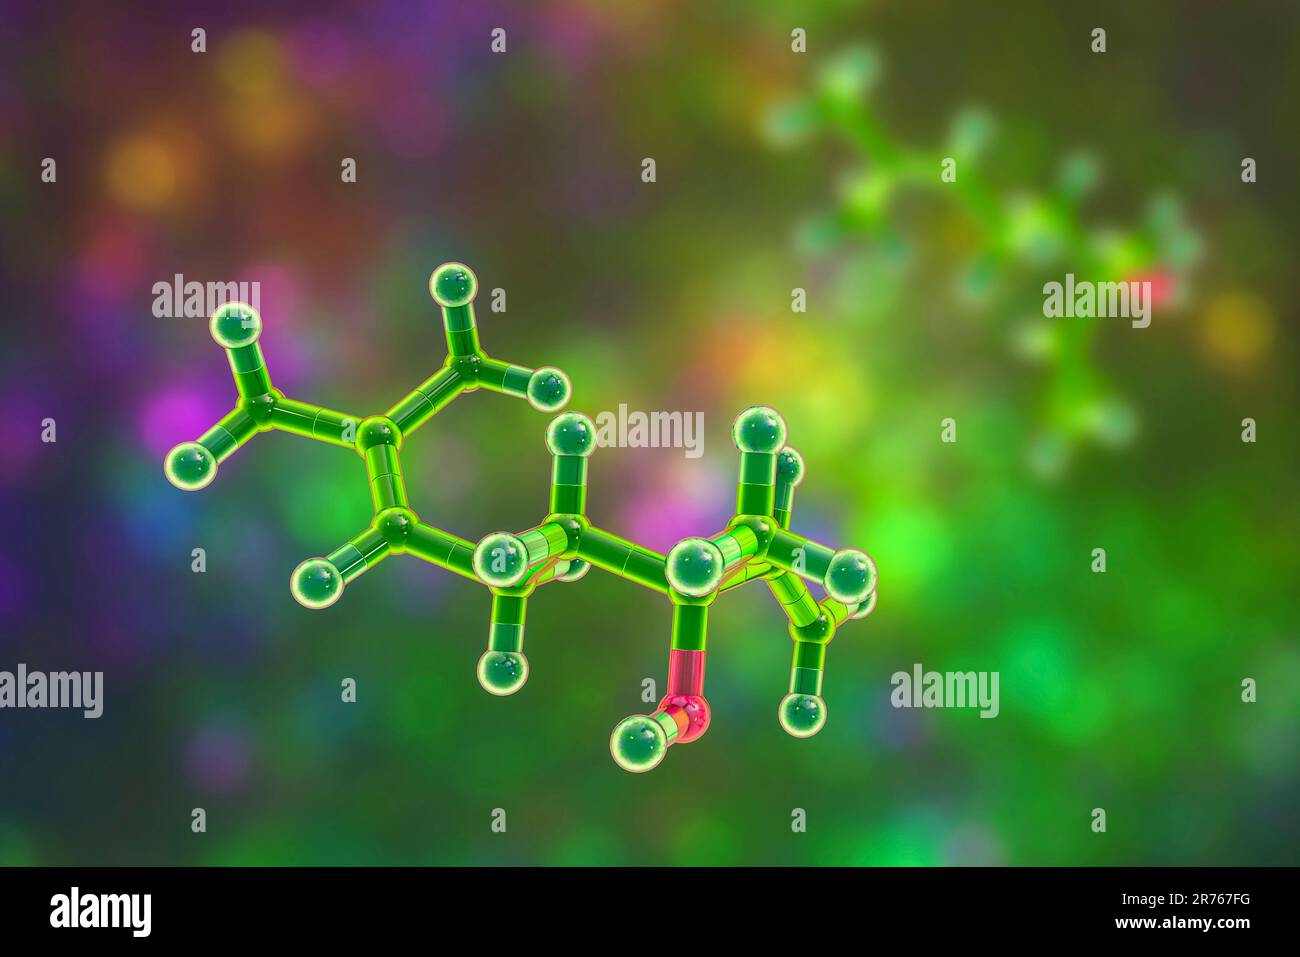 Linalool molecule, computer illustration. Naturally occurring organic compound found in essential oils of lavender, rose, basil, tea tree, coriander, Stock Photo